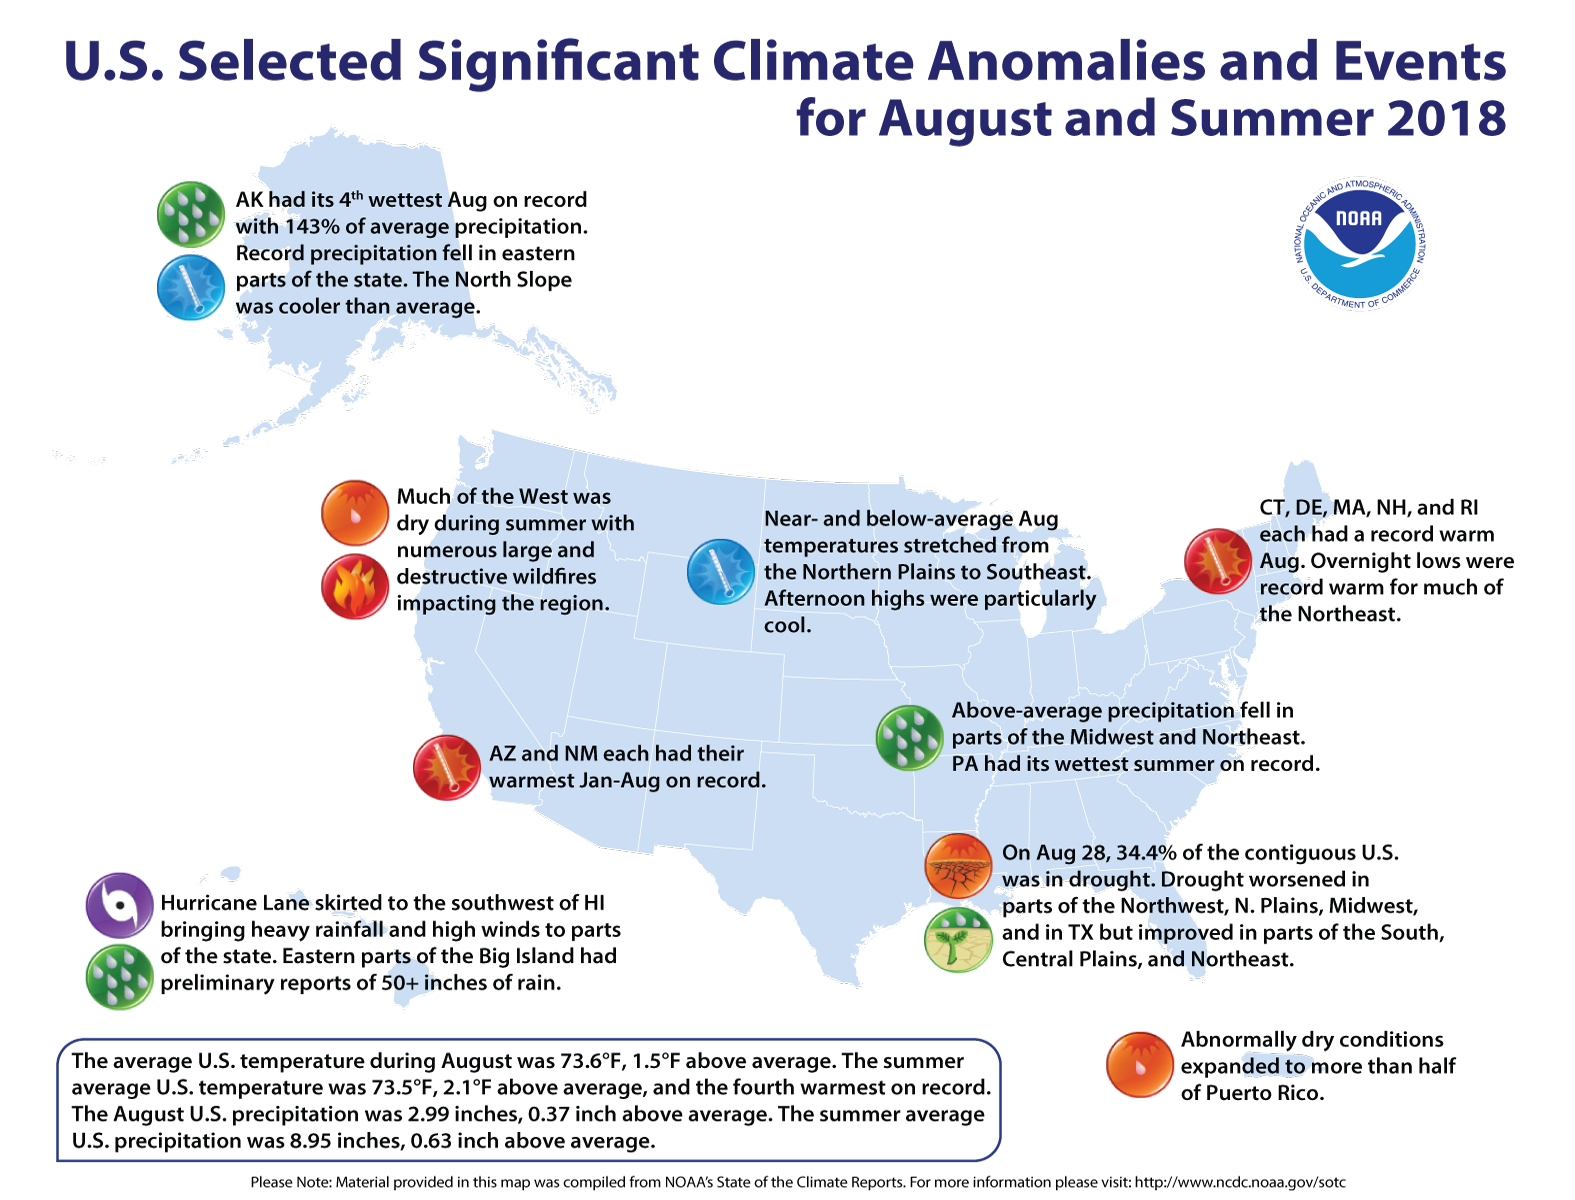 An annotated map of the United States showing notable climate events that occurred in August and Summer 2018. For details, see the bulleted list below in our story and online at http://bit.ly/USClimate201808. 